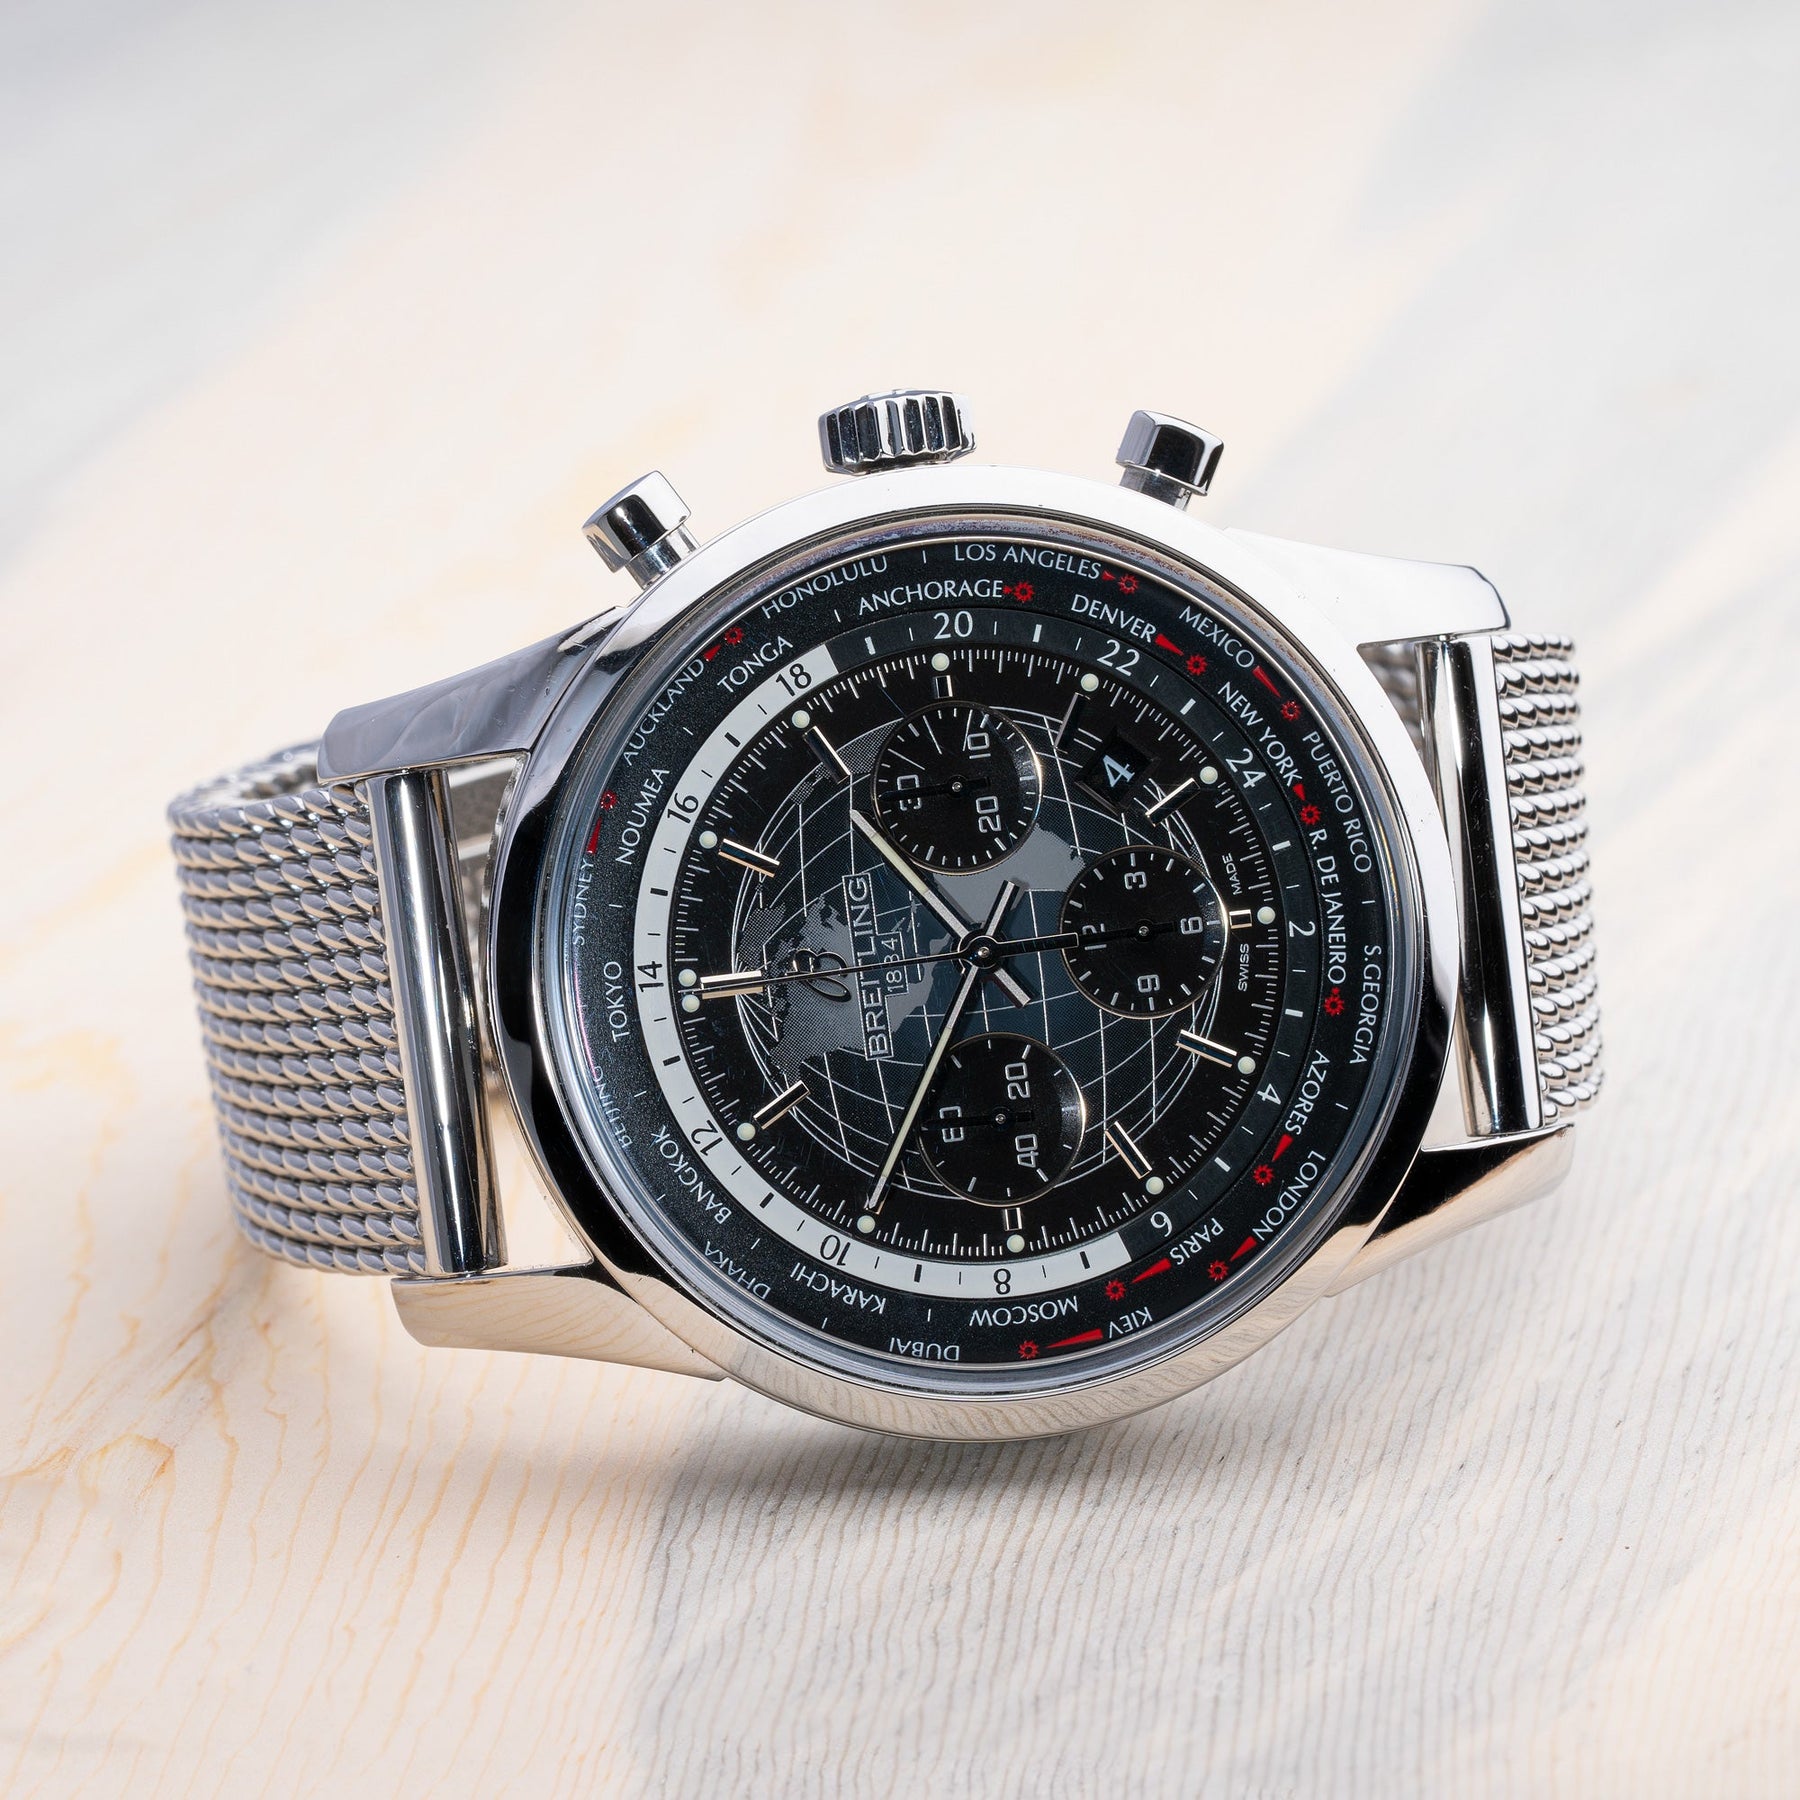 Breitling Transocean Chronograph Limited Edition for $5,698 for